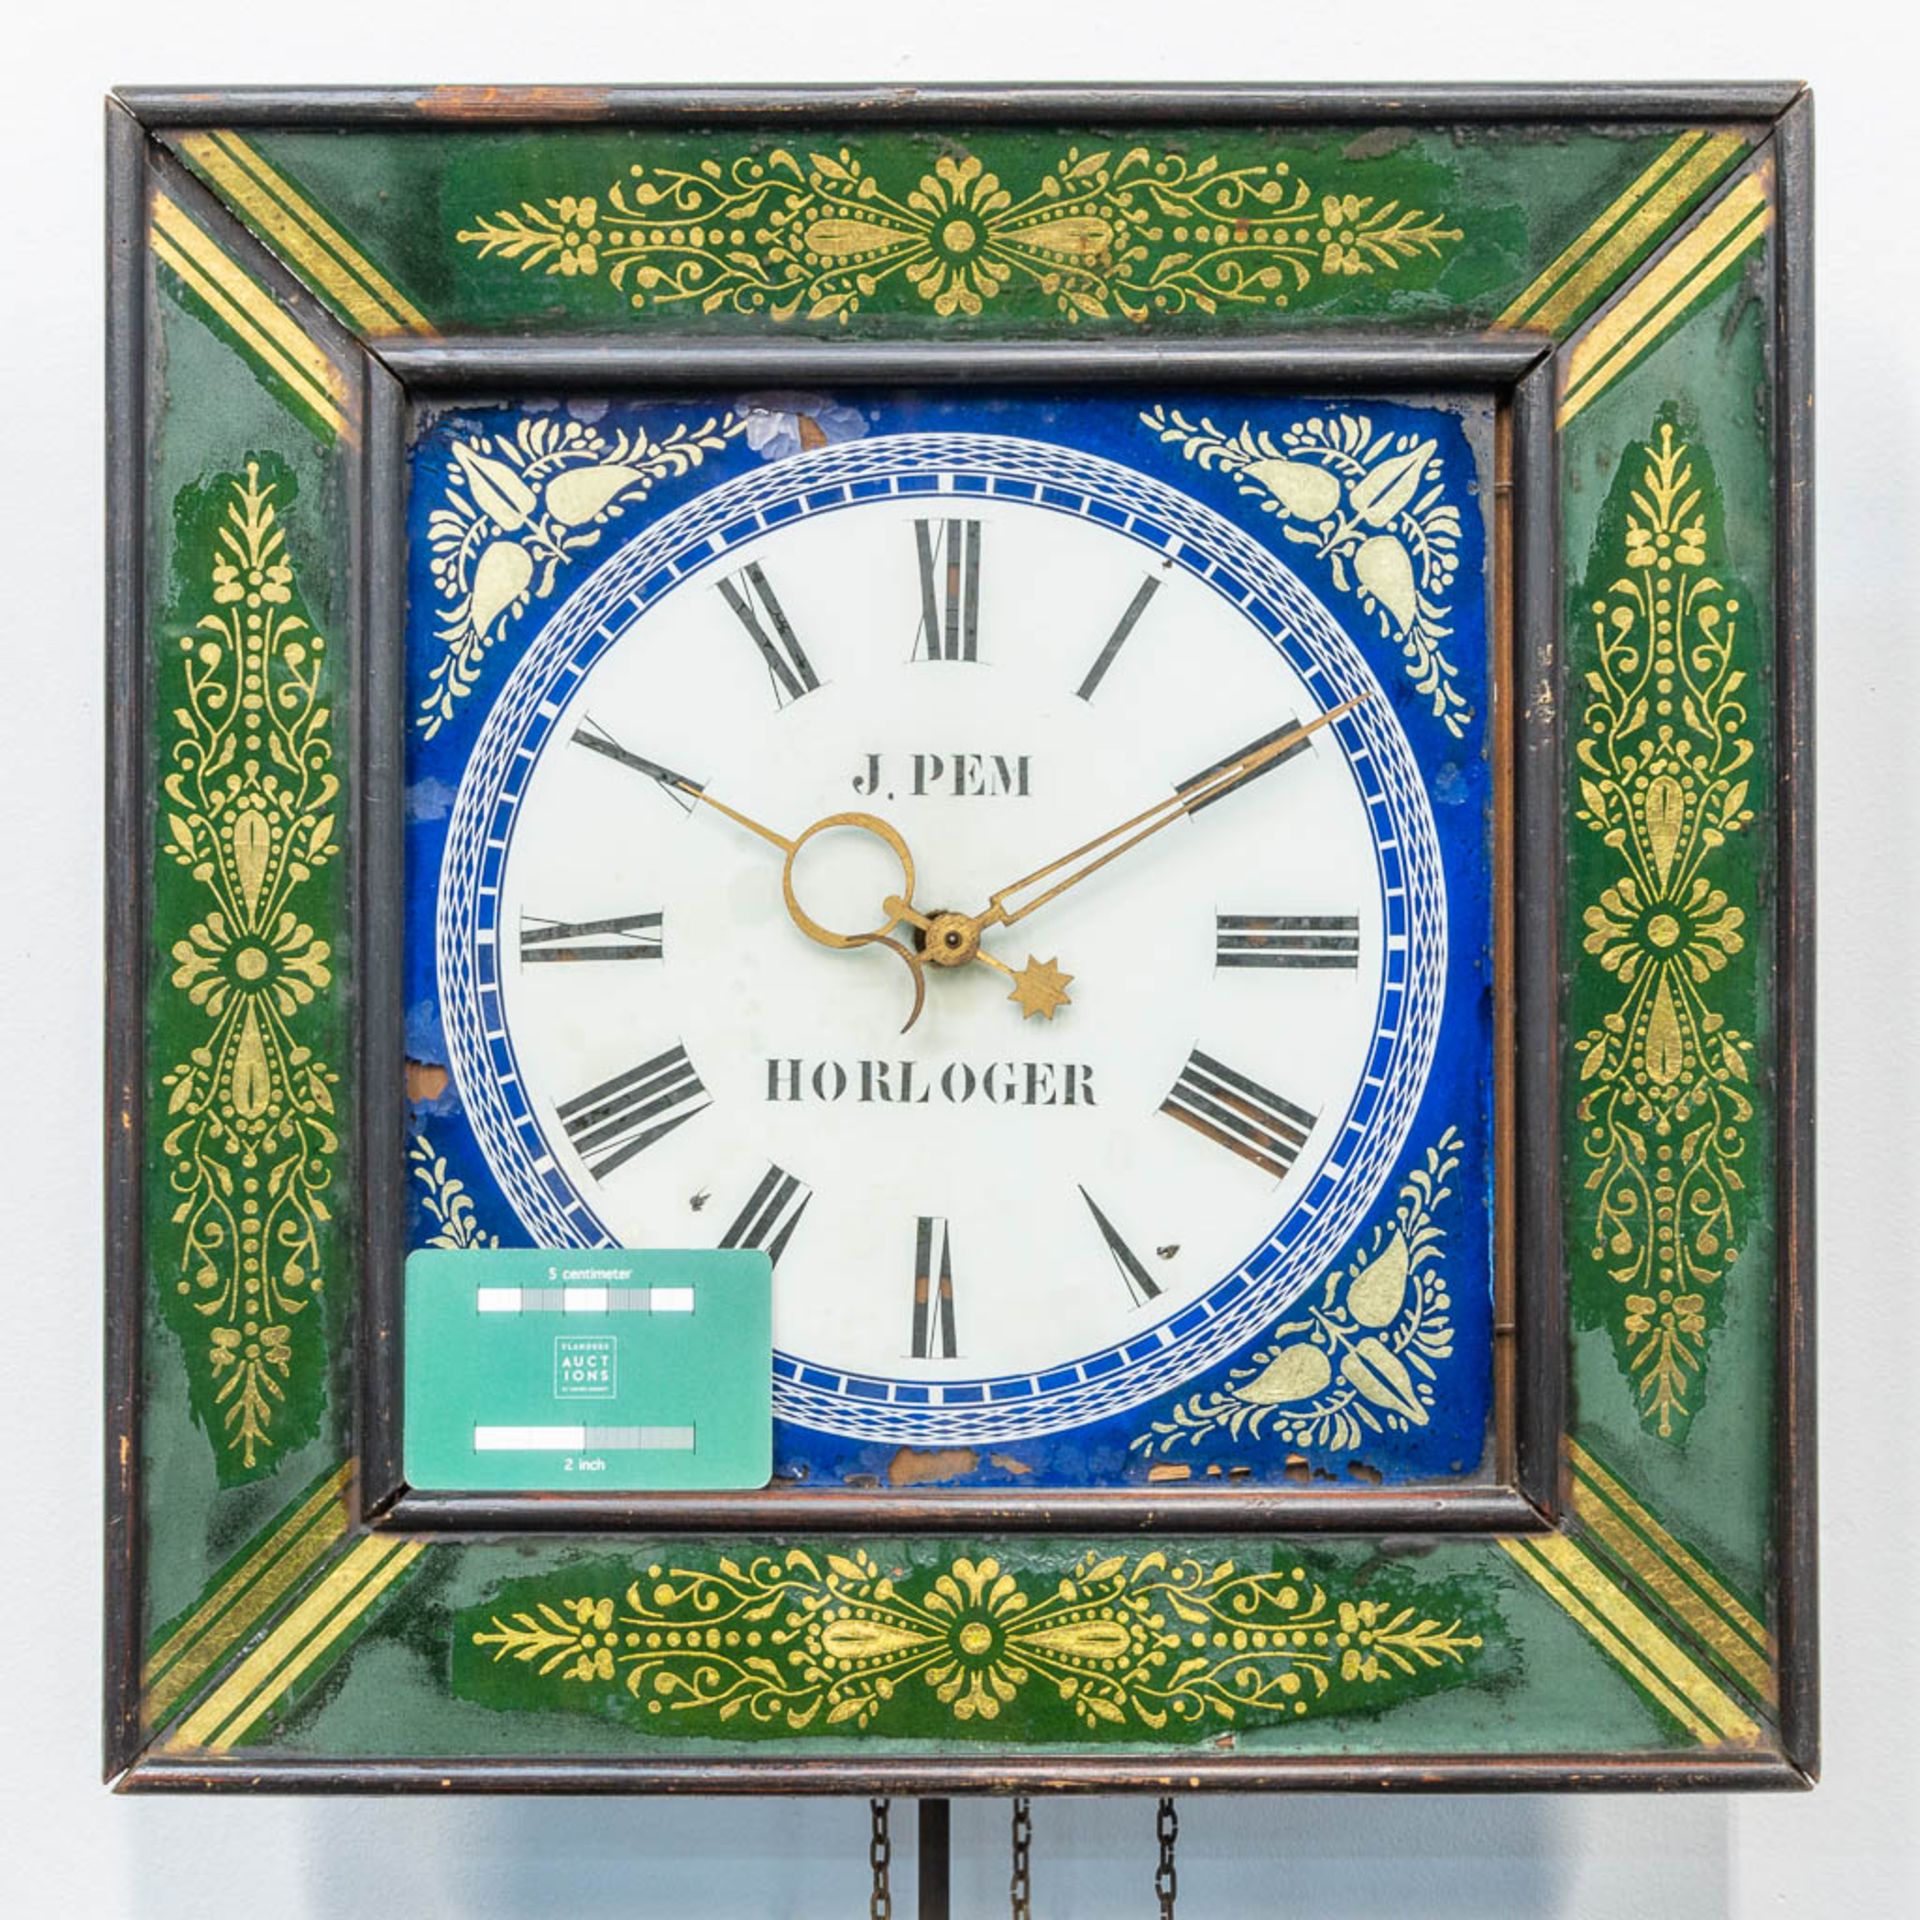 A clock with eglomise reverse glass painting, marked J. Pem Horloger. (12 x 39 x 39 cm) - Image 6 of 8